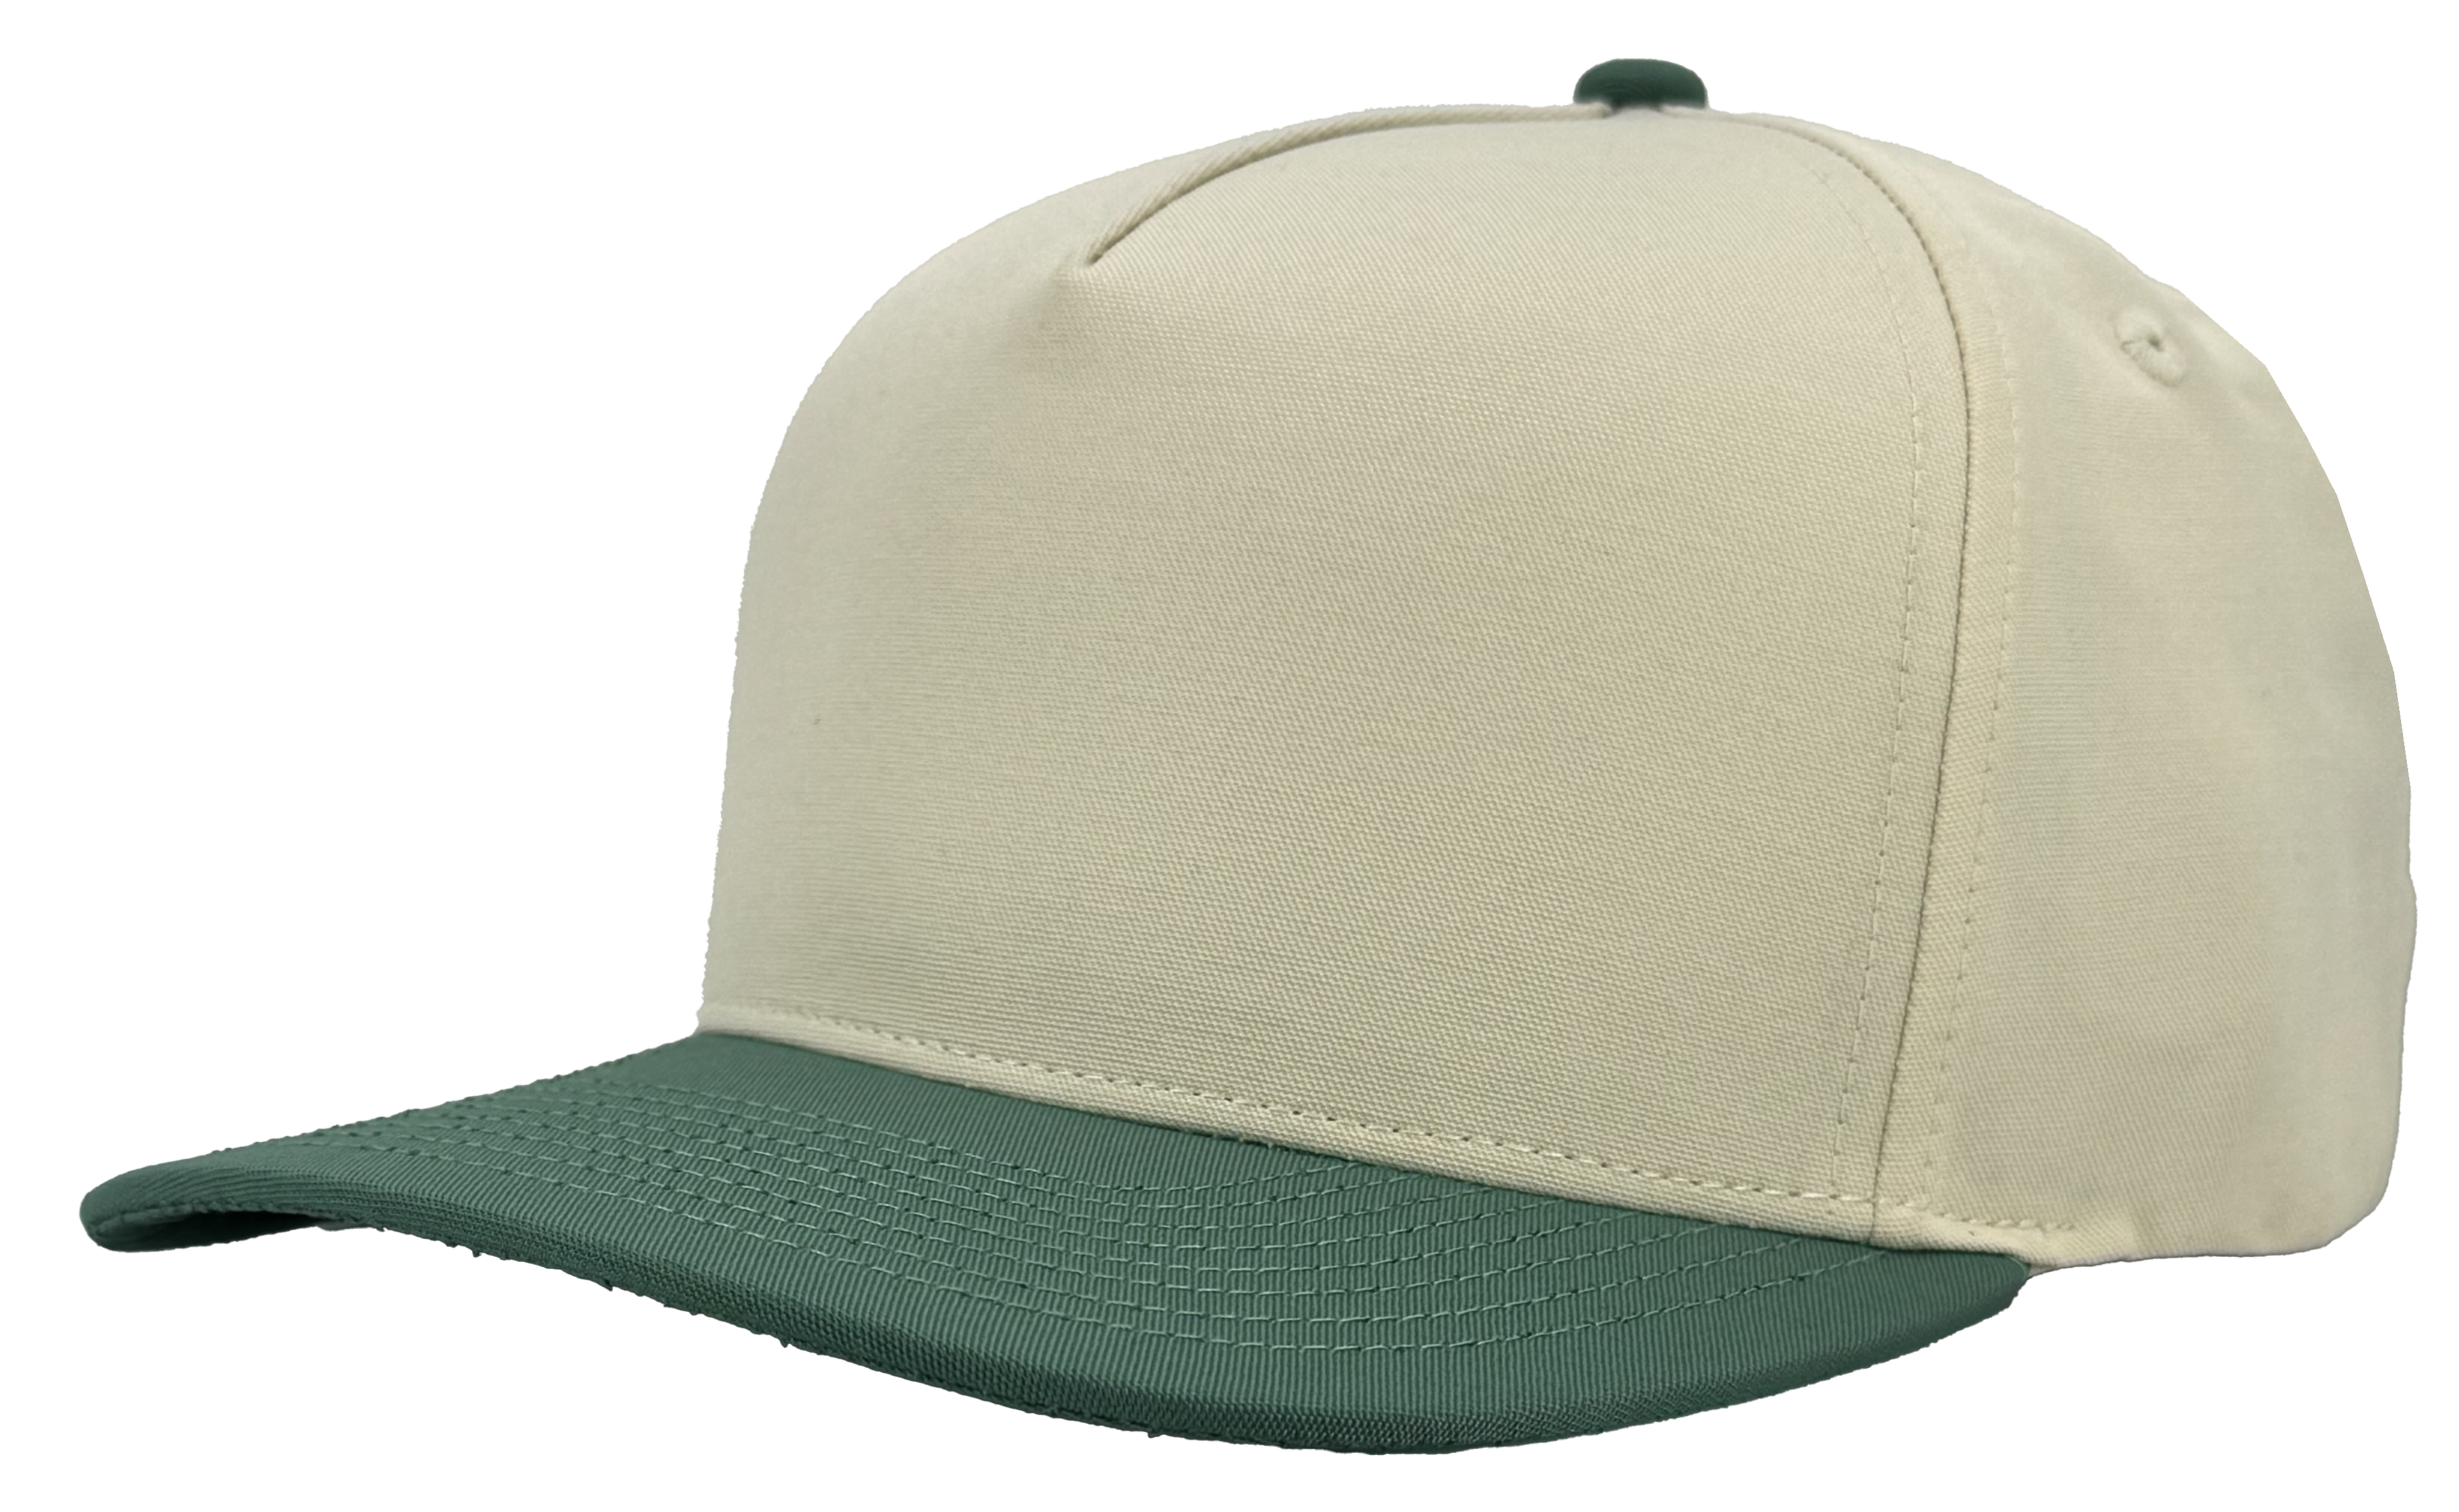 VINTAGE 5 PANEL MASTERS GREEN WHITE HAT